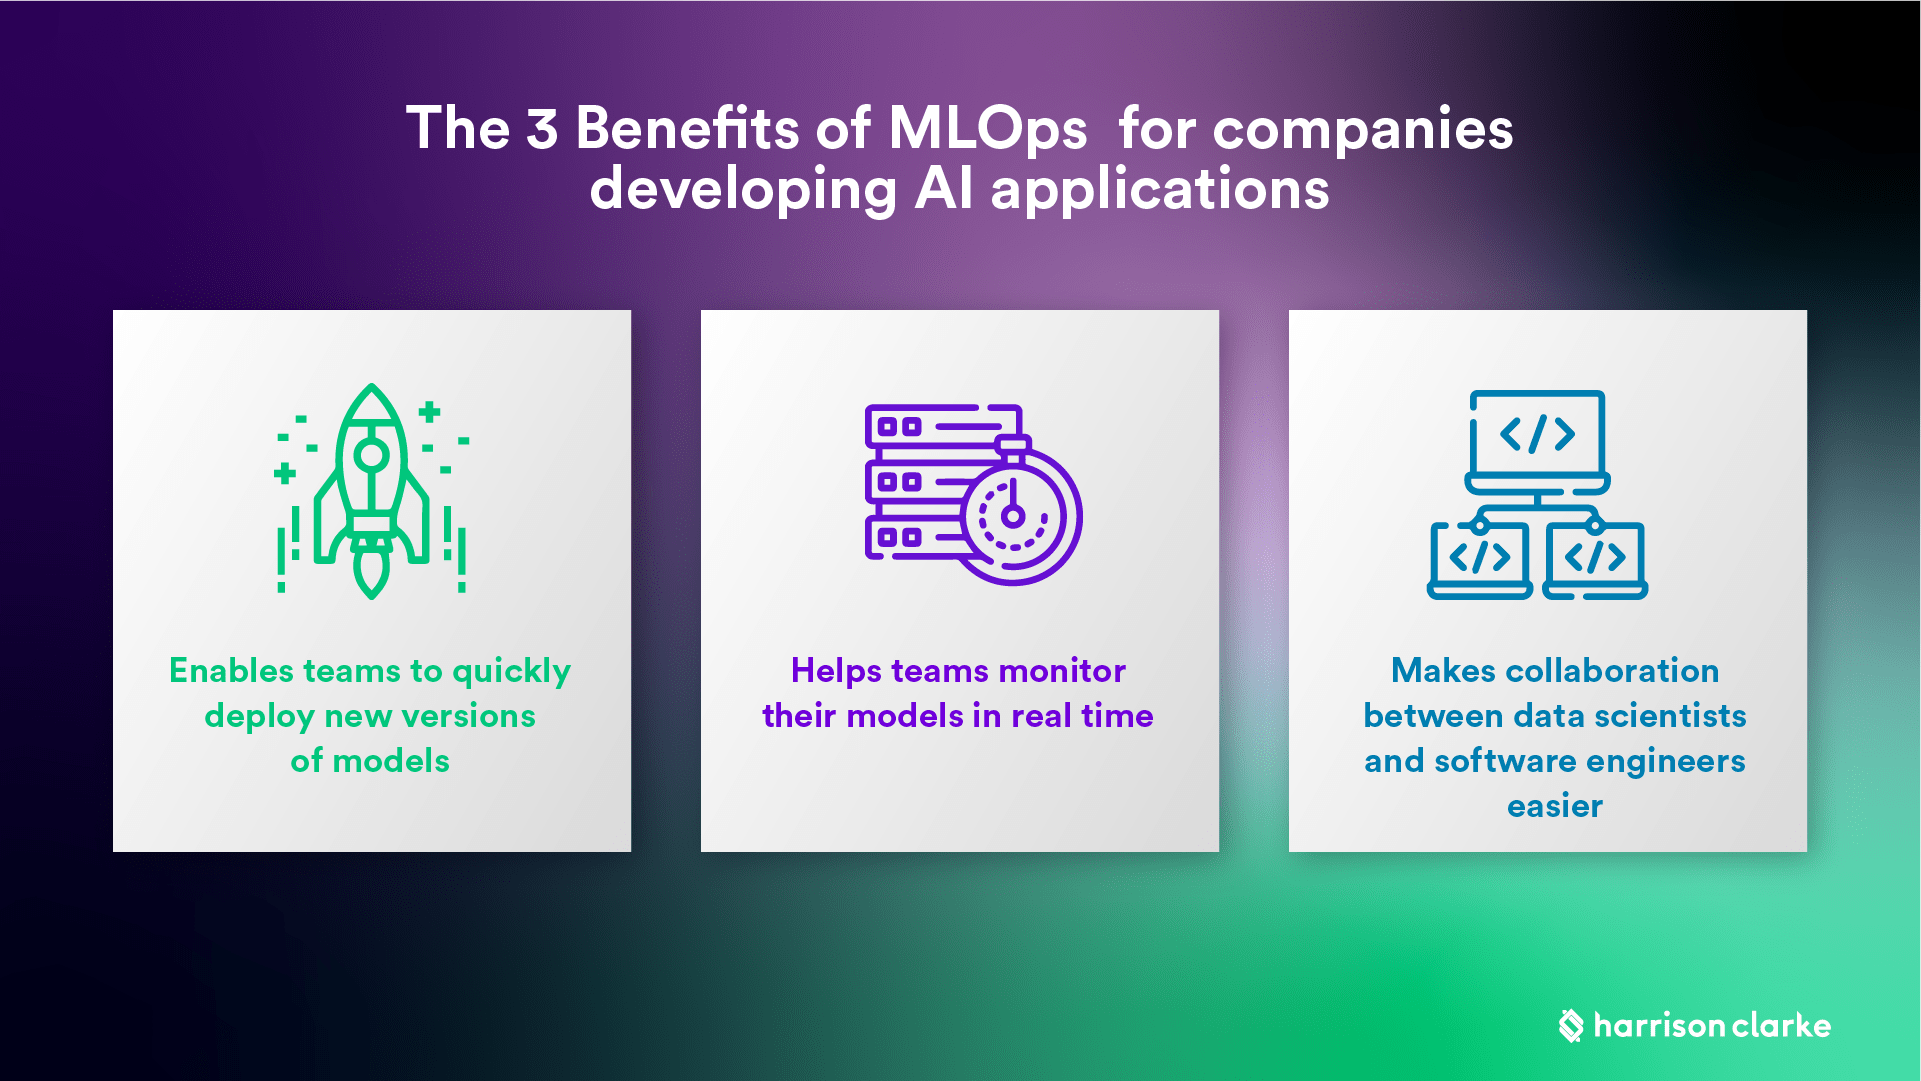 The Benefits of MLOps